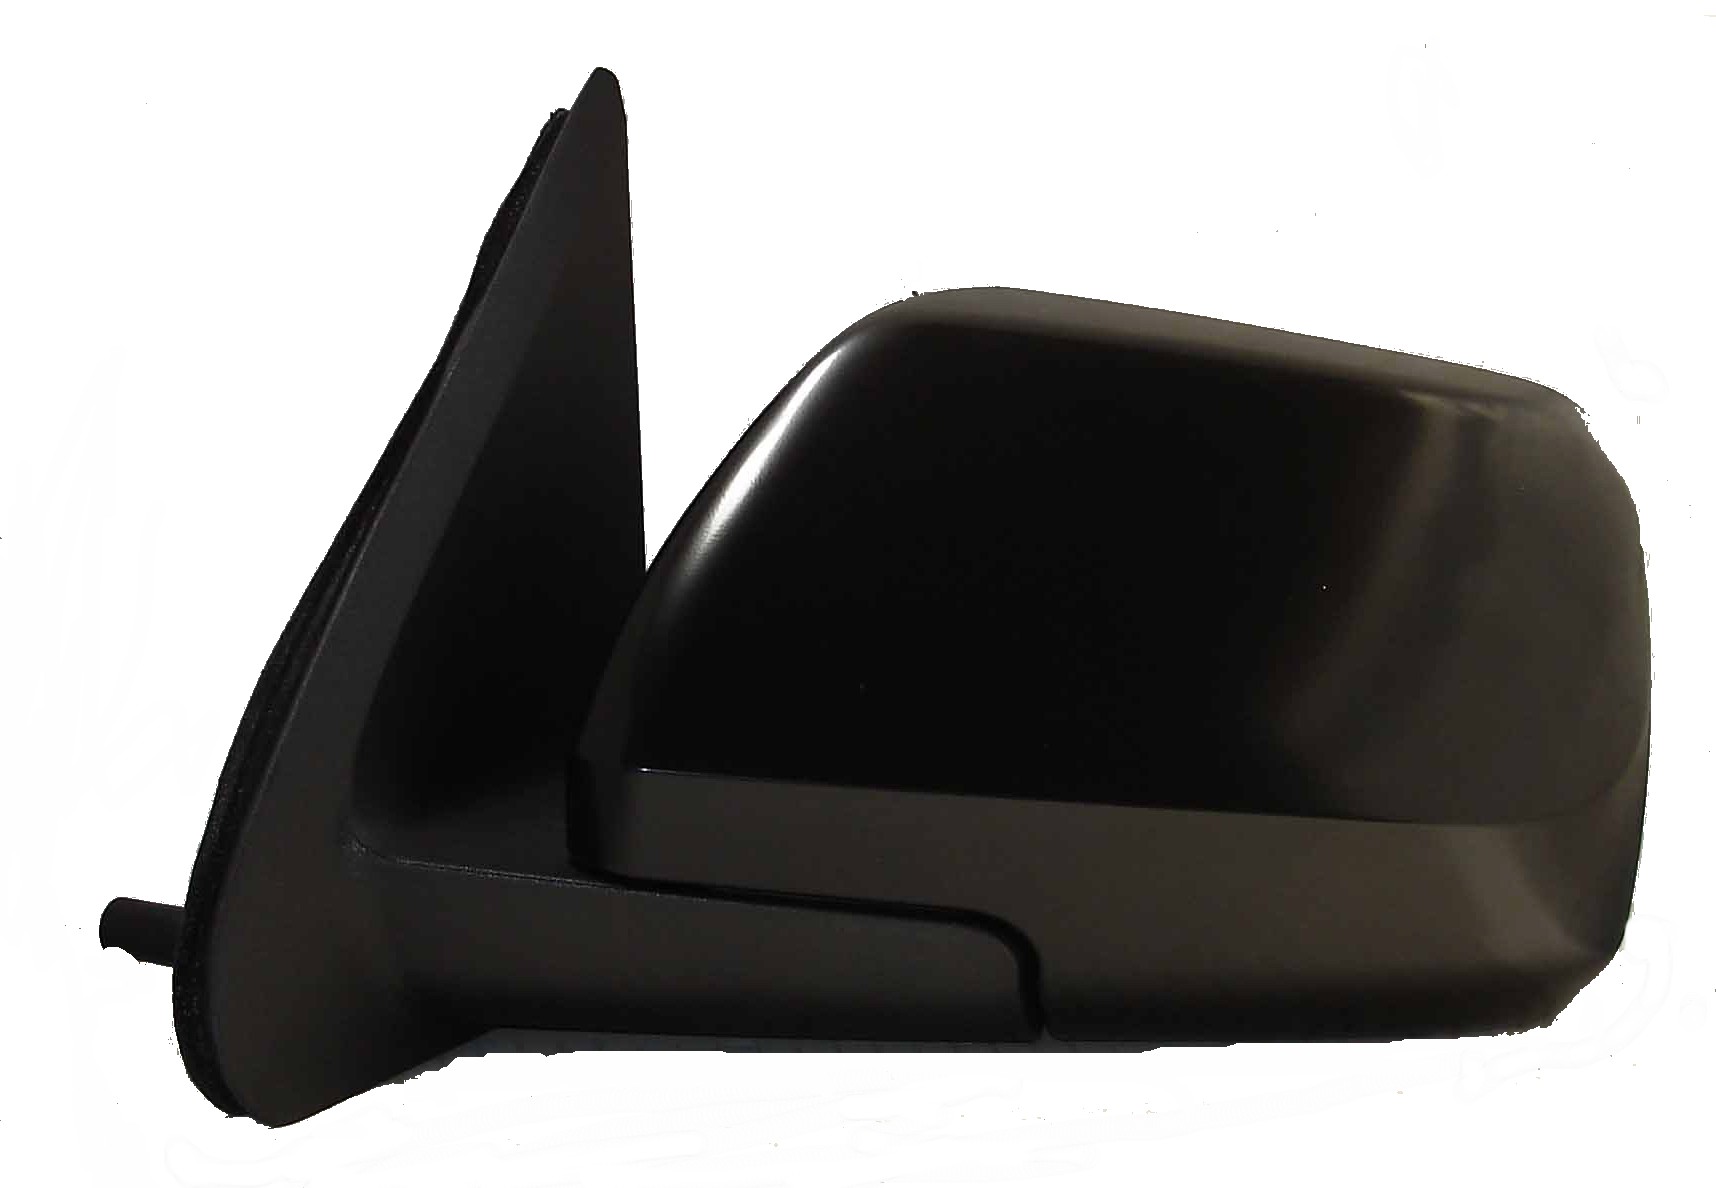 Aftermarket MIRRORS for MERCURY - MARINER, MARINER,08-09,LT Mirror outside rear view